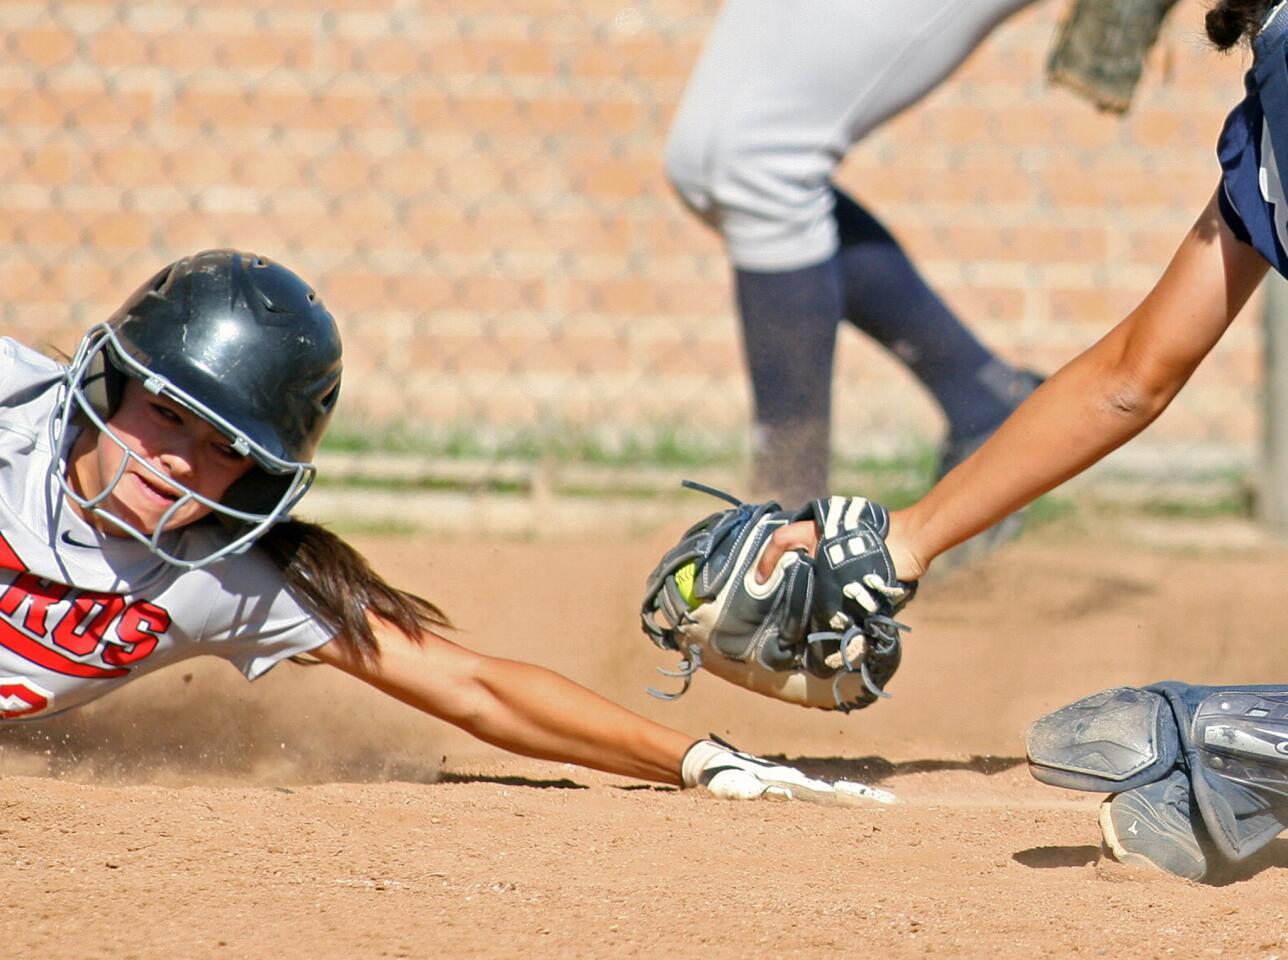 Glendale's Sammy Fabian reaches to make sure she is safely touching home plate to score against Crescenta Valley in a Pacific League softball game at Glendale High School on Thursday, May 1, 2014.